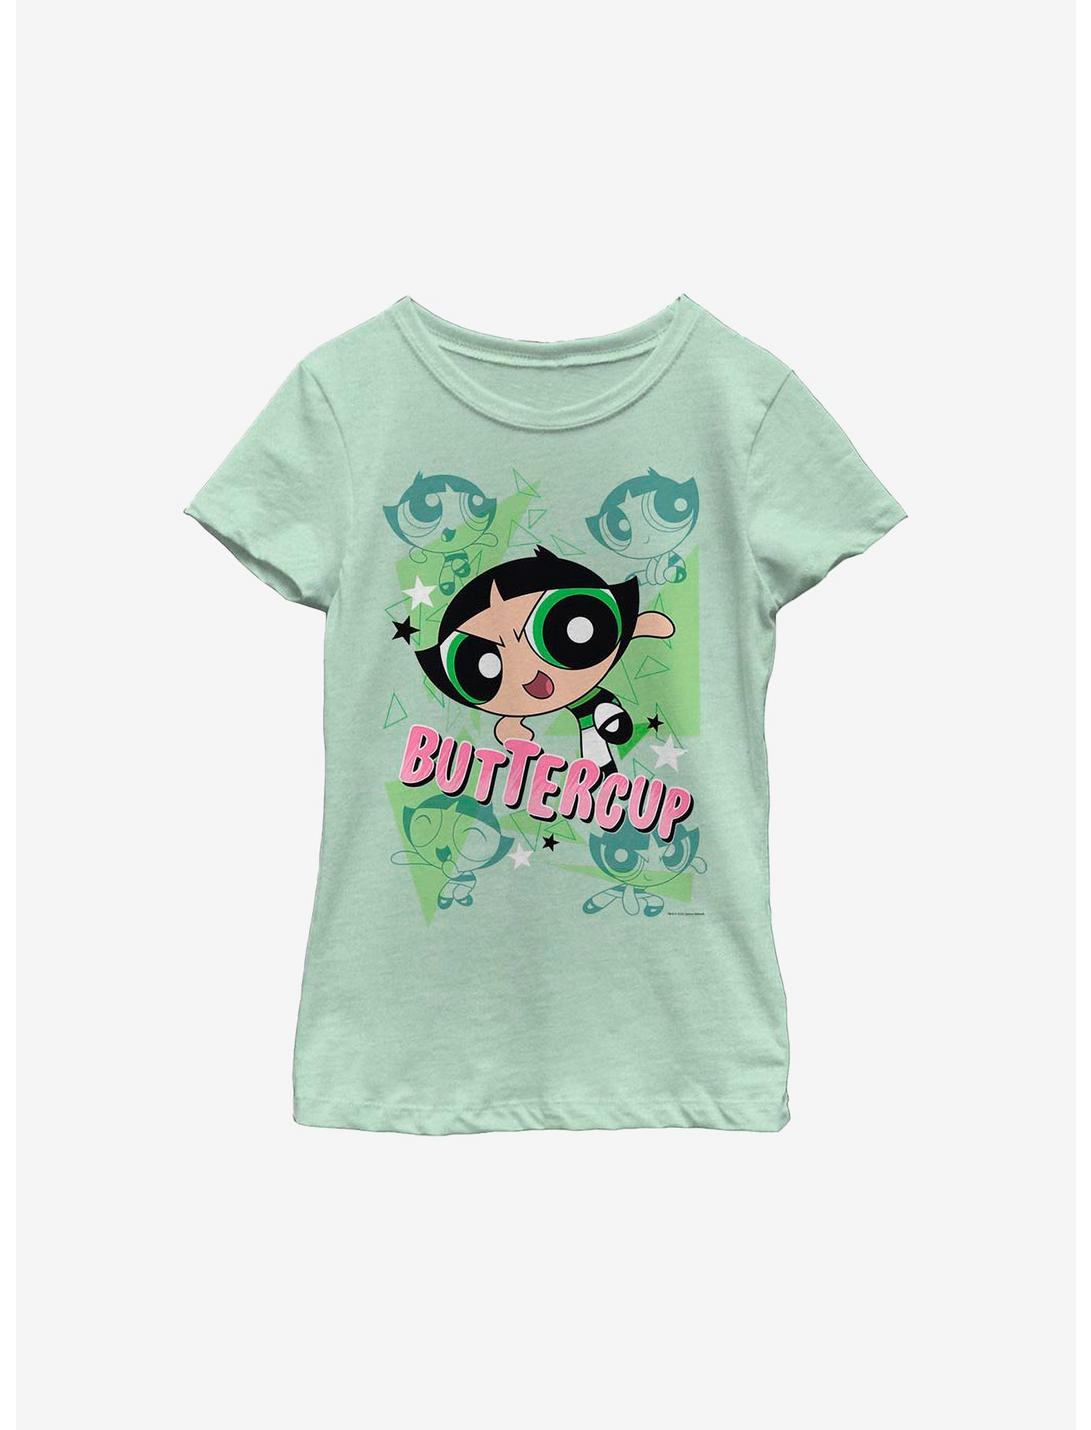 The Powerpuff Girls Buttercup Moves Youth Girls T-Shirt, MINT, hi-res